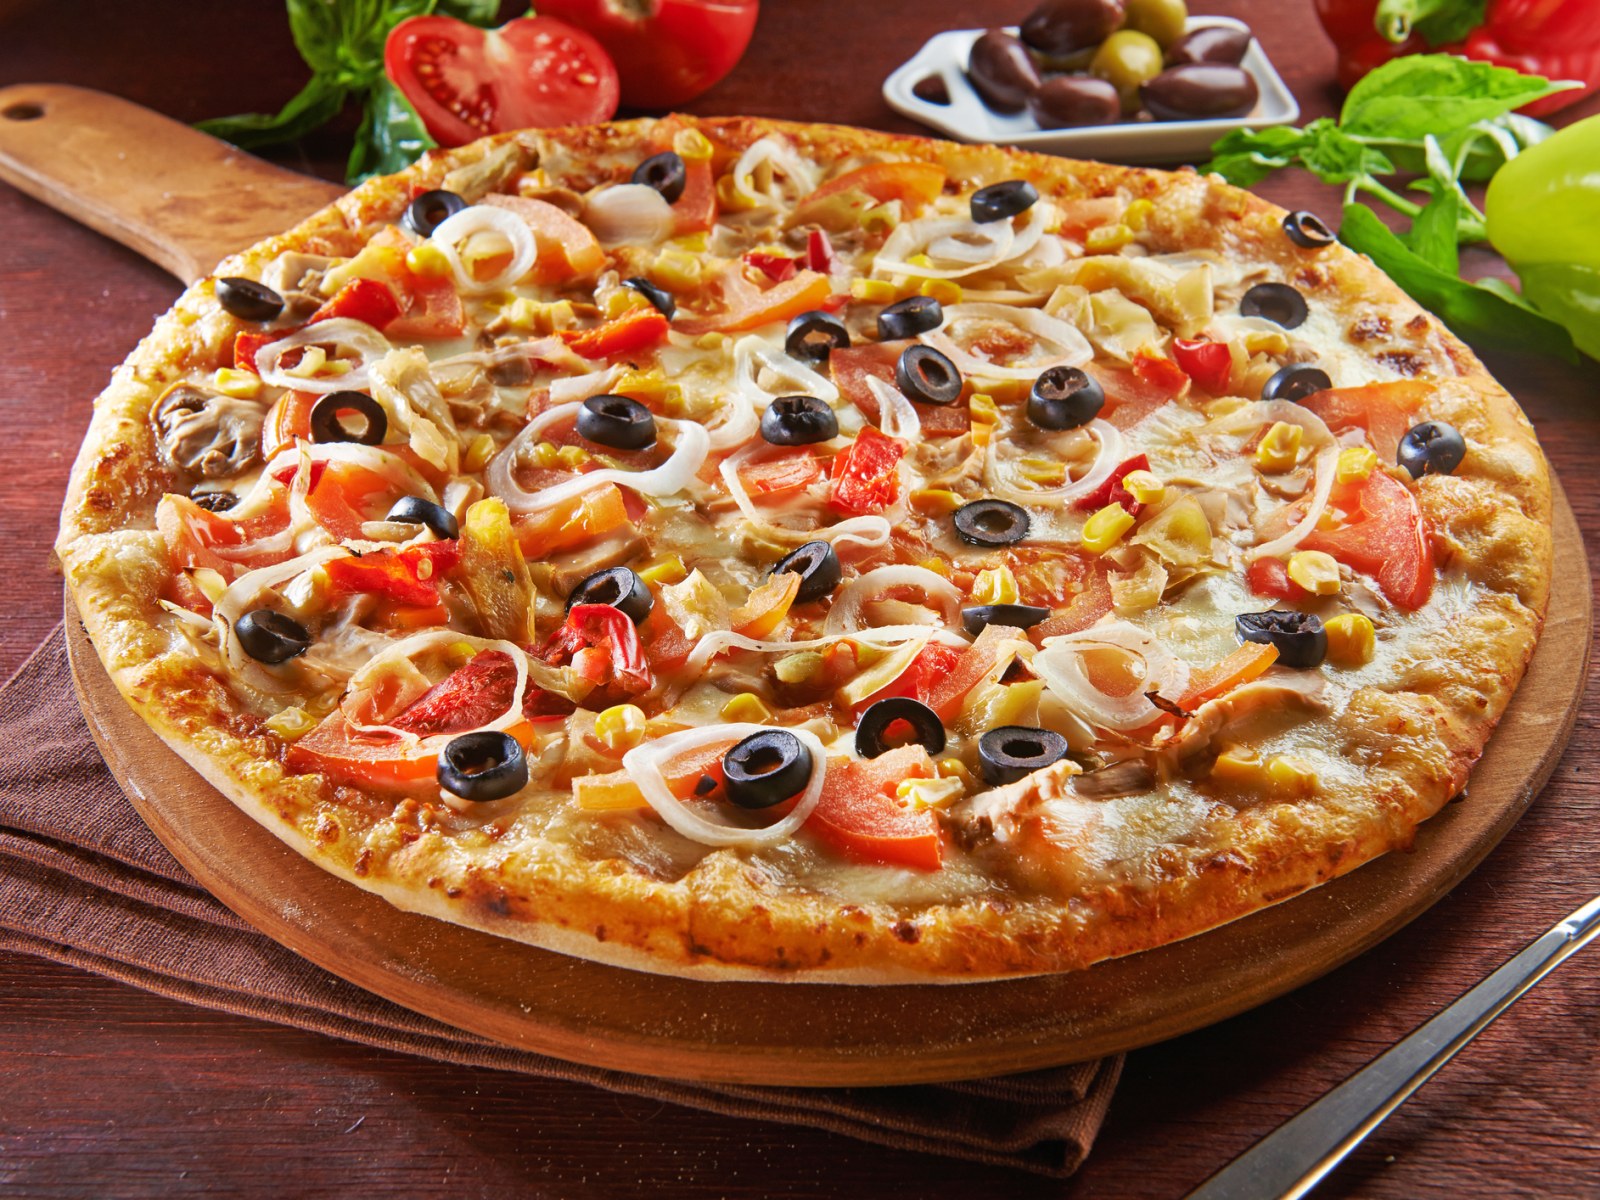 National Pizza Day 2020 Free Pizza And Deals At Domino S Pizza Hut Papa John S And More